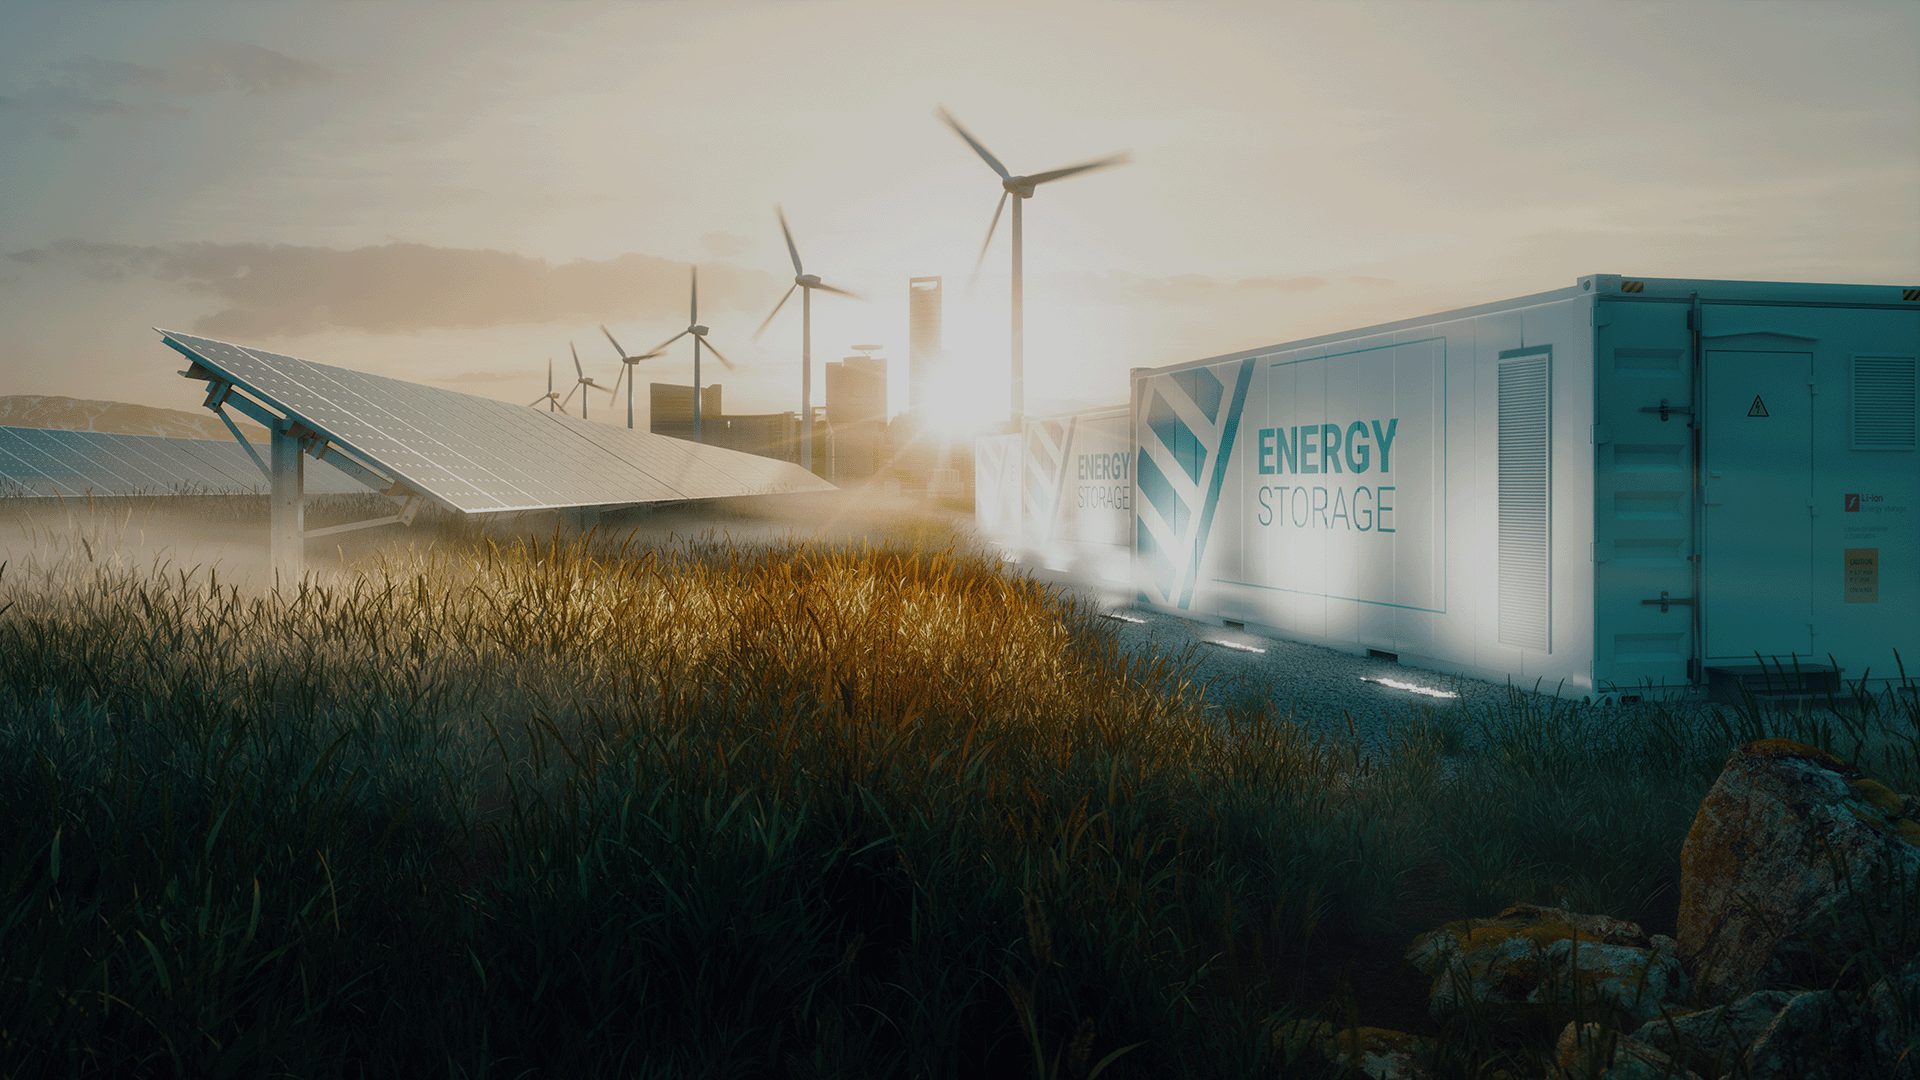 ENERGY STORAGE SOLUTIONS FOR A GREEN WORLD